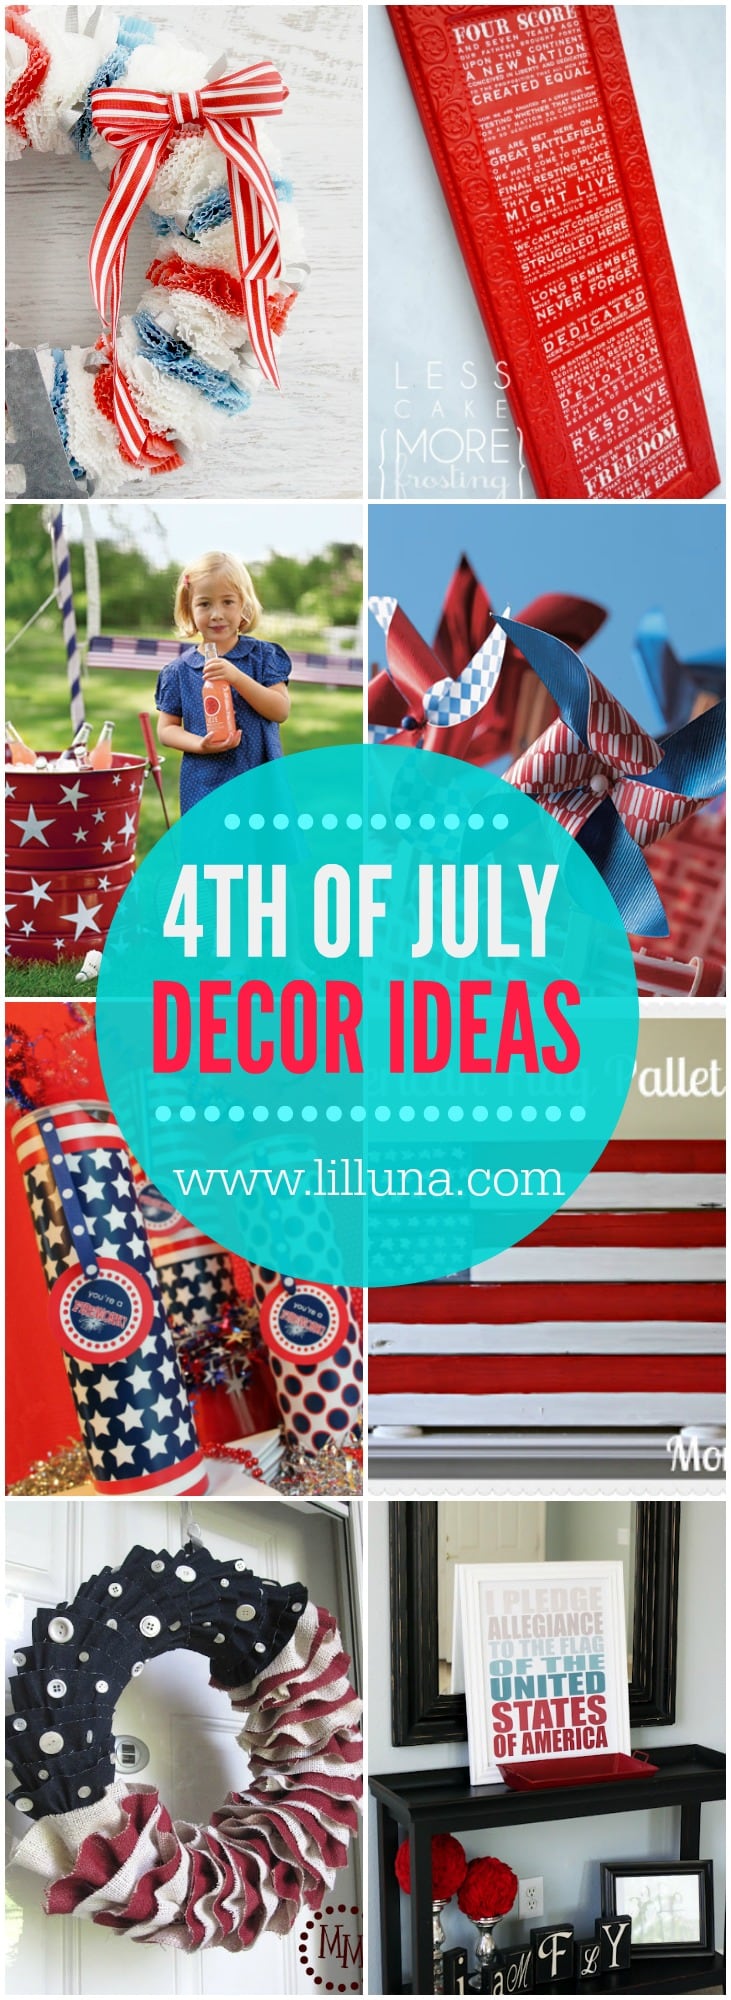 4th of July Decorations - A great collection of red, white and blue decor ideas to help you decorate your home and events this July!